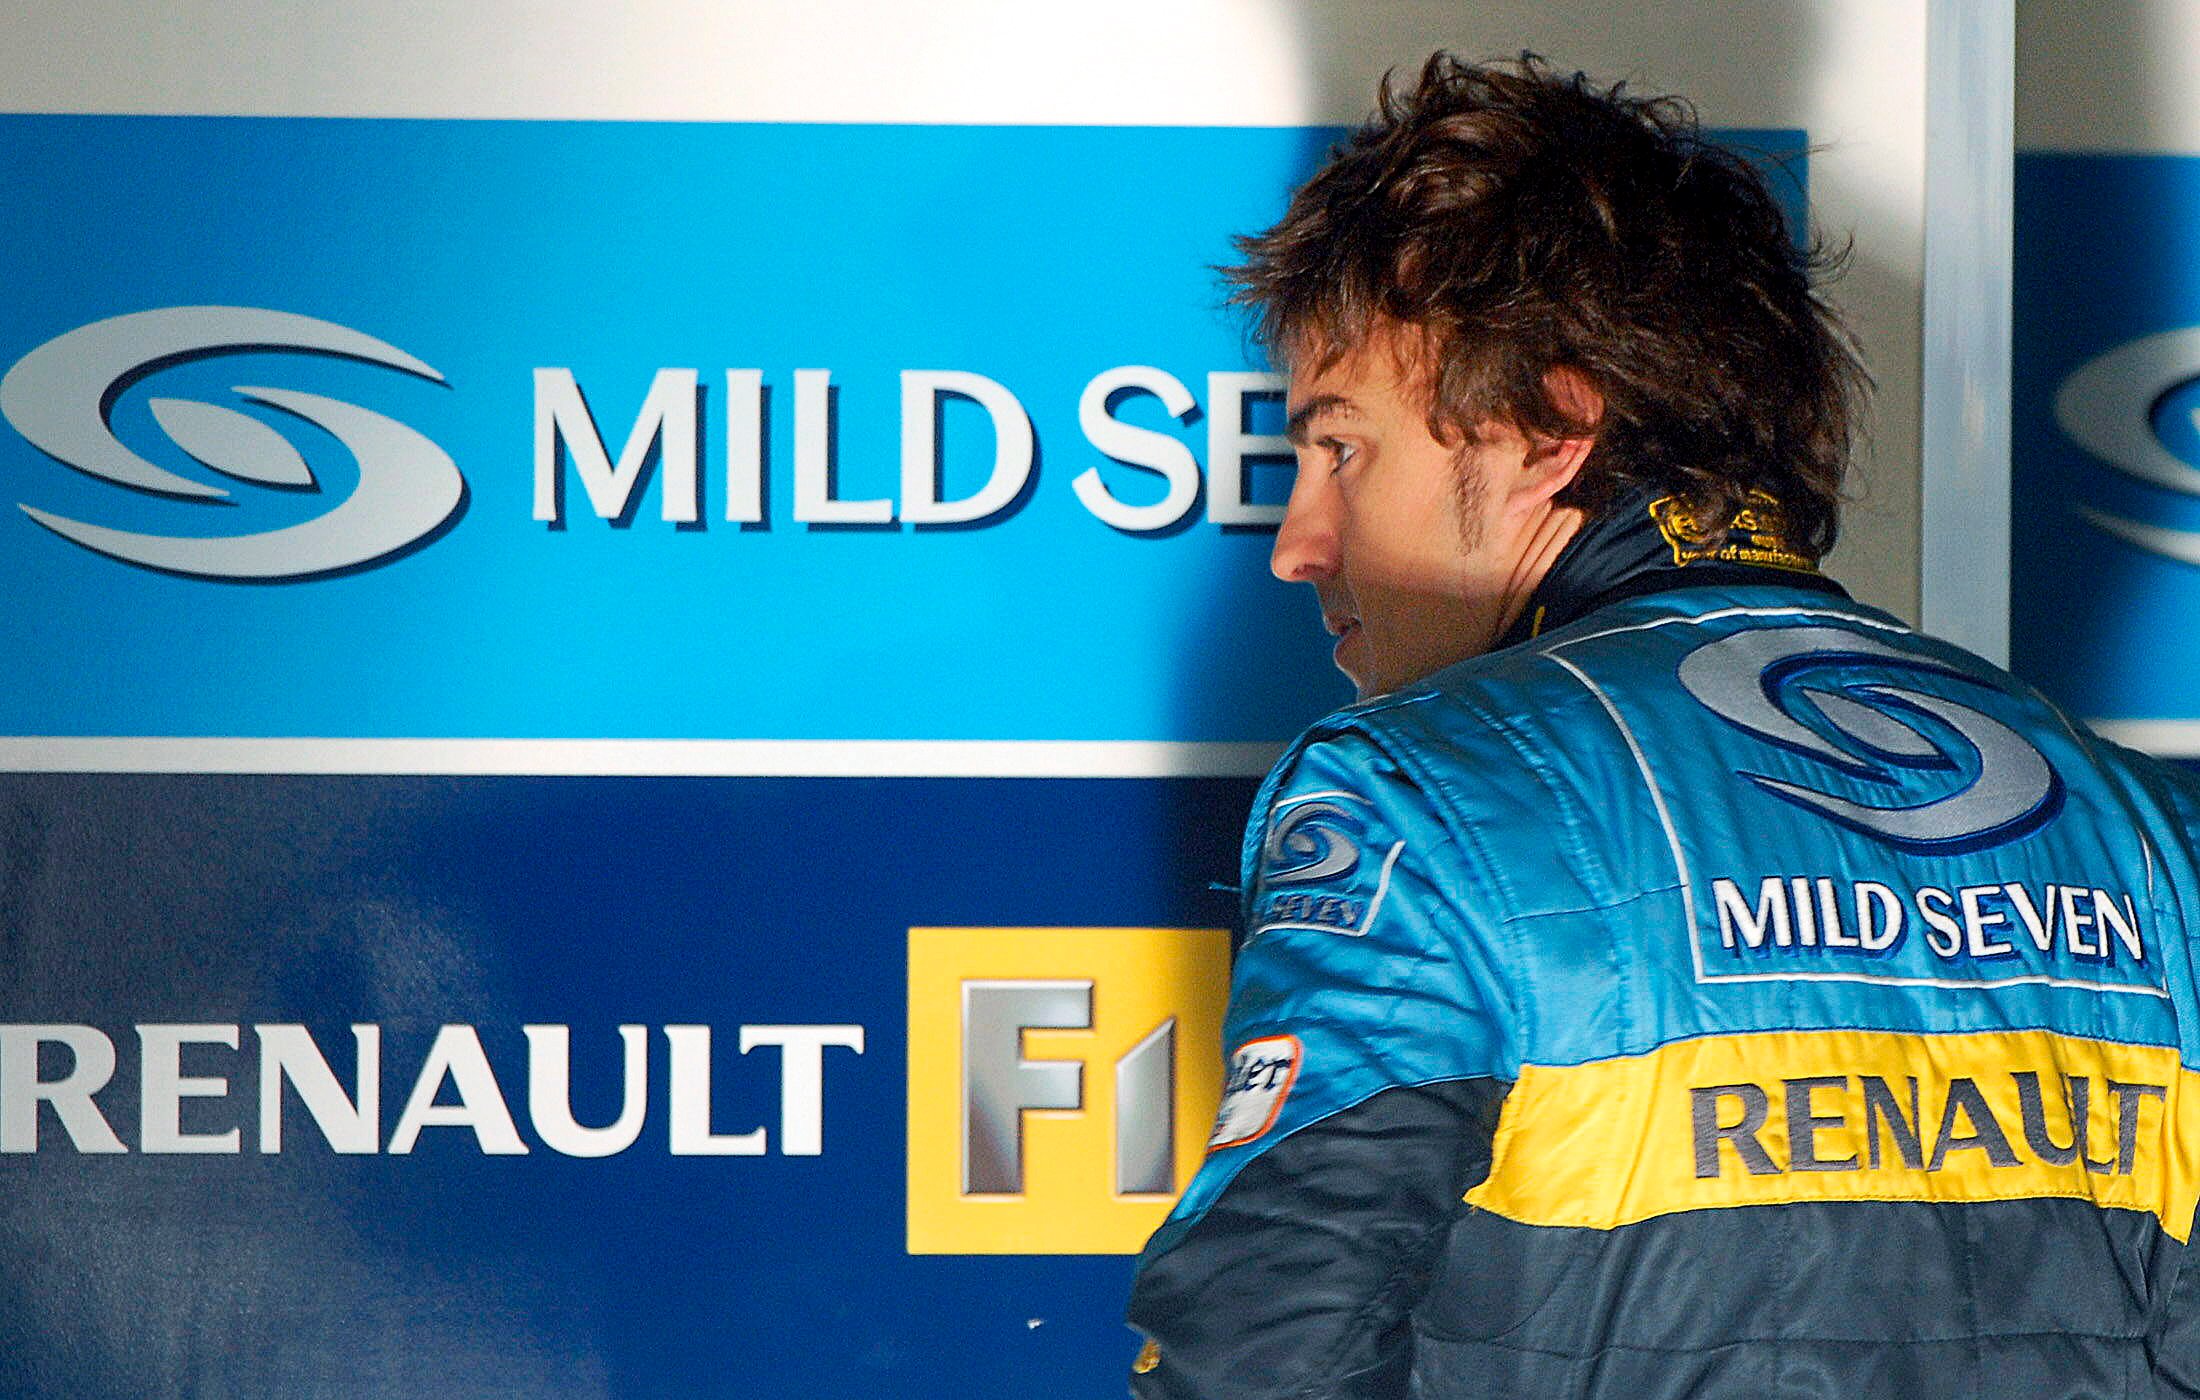 Fernando Alonso To Return To F1 With Renault In 2021 Daily Sabah